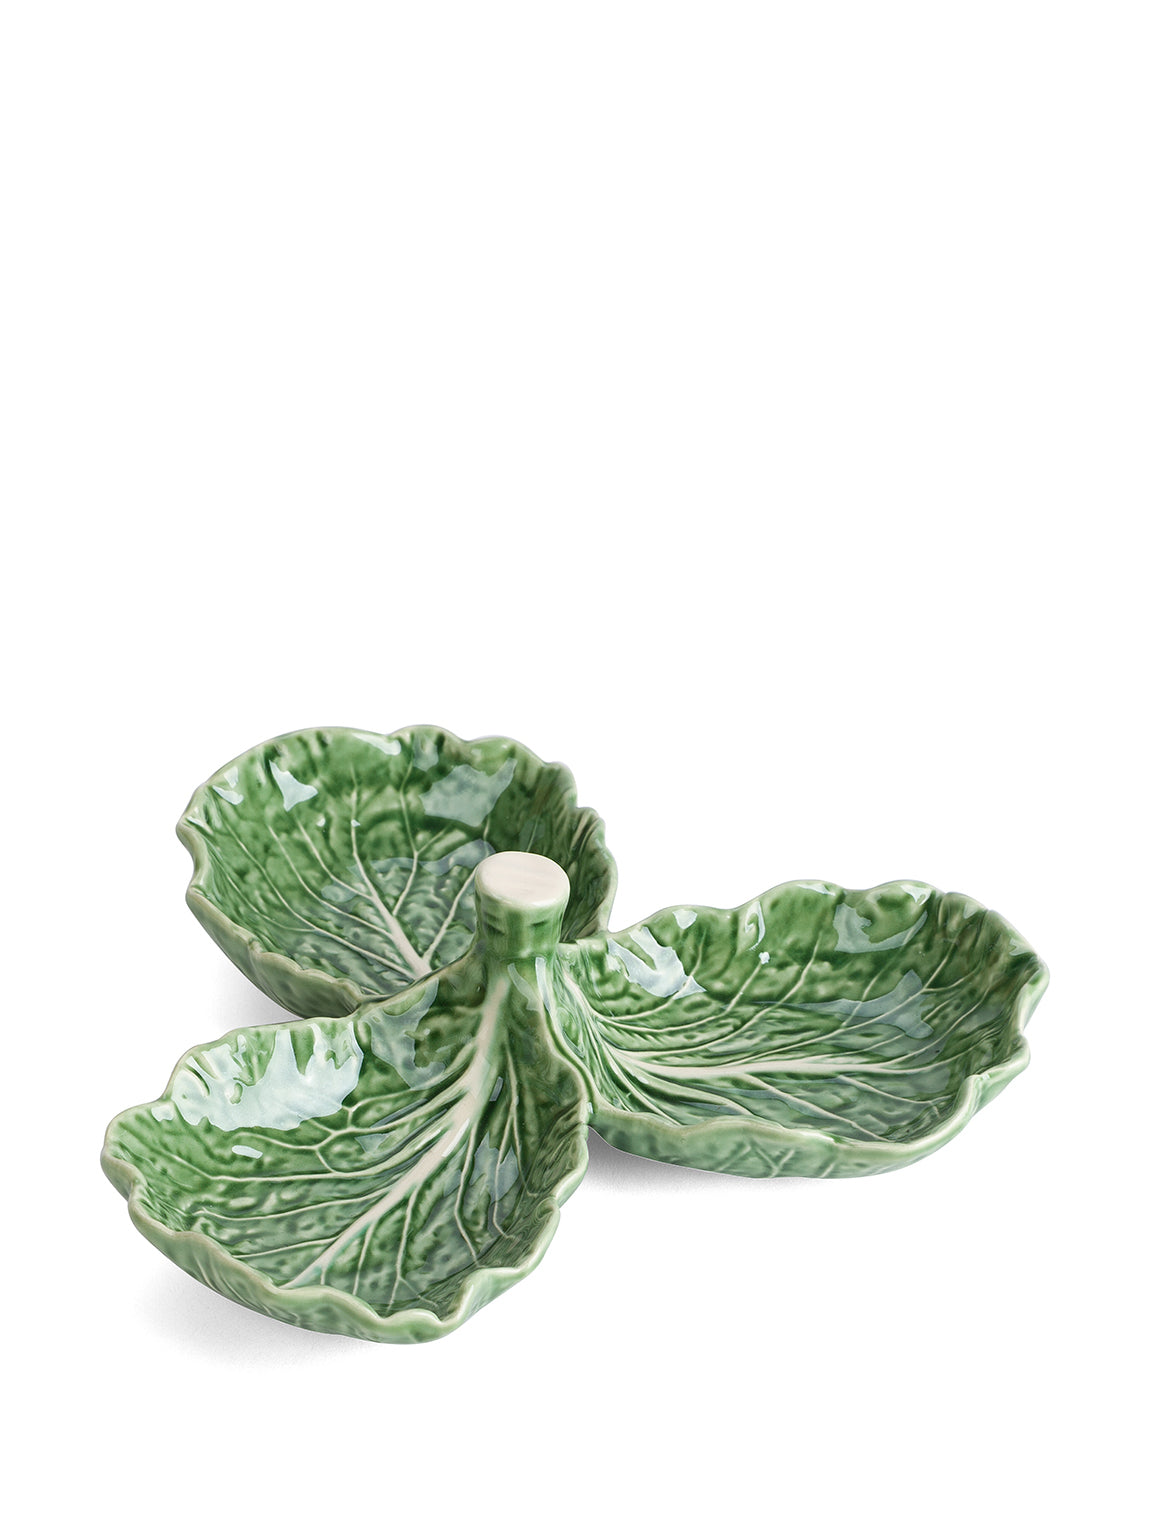 Cabbage Olive Dish, green